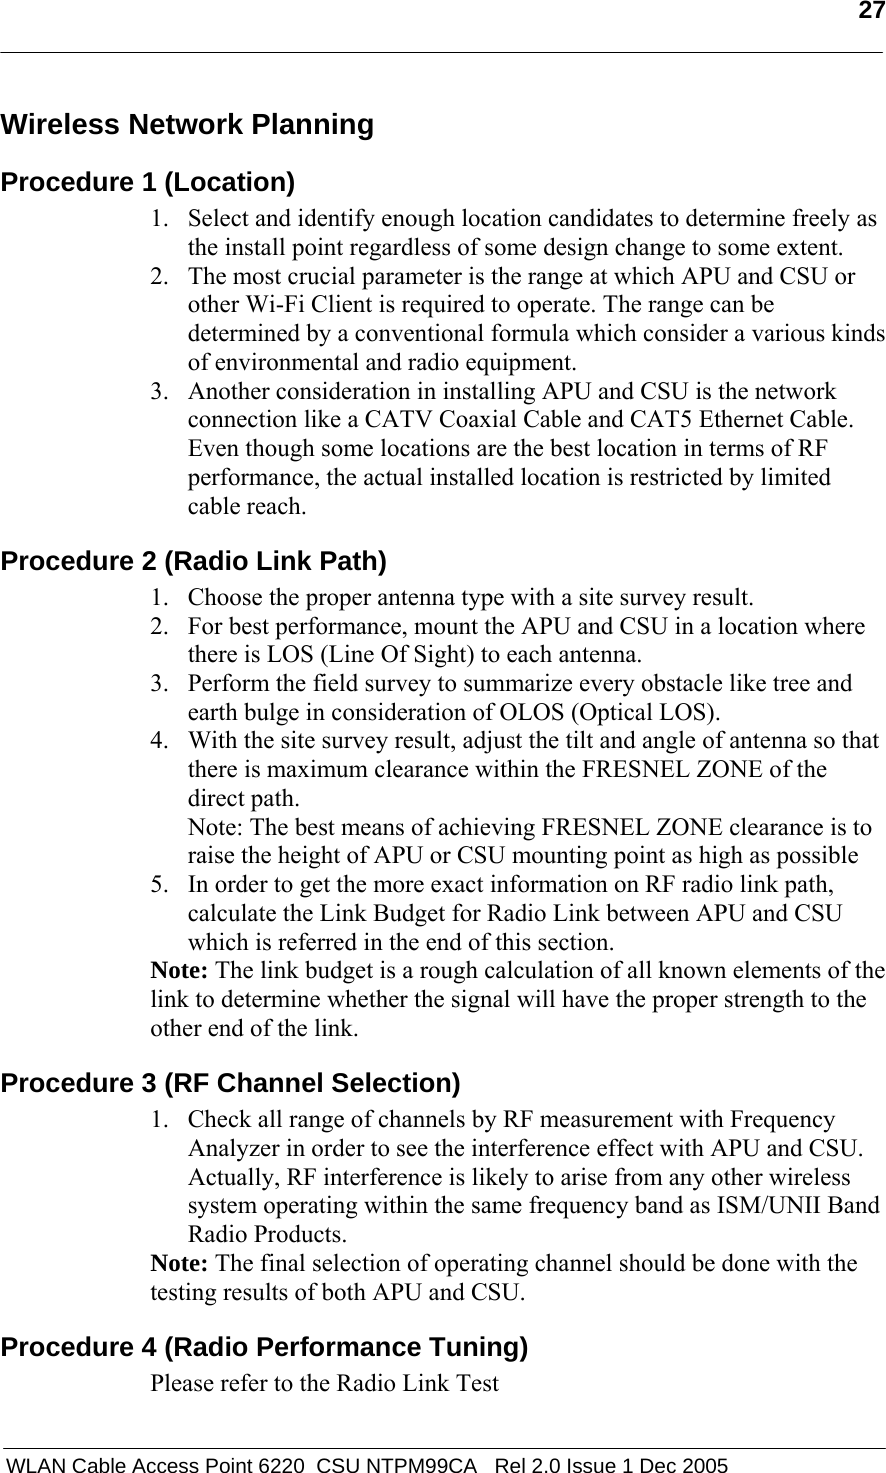   27   WLAN Cable Access Point 6220  CSU NTPM99CA   Rel 2.0 Issue 1 Dec 2005 Wireless Network Planning  Procedure 1 (Location) 1. Select and identify enough location candidates to determine freely as the install point regardless of some design change to some extent. 2. The most crucial parameter is the range at which APU and CSU or other Wi-Fi Client is required to operate. The range can be determined by a conventional formula which consider a various kinds of environmental and radio equipment. 3. Another consideration in installing APU and CSU is the network connection like a CATV Coaxial Cable and CAT5 Ethernet Cable.  Even though some locations are the best location in terms of RF performance, the actual installed location is restricted by limited cable reach. Procedure 2 (Radio Link Path) 1. Choose the proper antenna type with a site survey result. 2. For best performance, mount the APU and CSU in a location where there is LOS (Line Of Sight) to each antenna.  3. Perform the field survey to summarize every obstacle like tree and earth bulge in consideration of OLOS (Optical LOS).  4. With the site survey result, adjust the tilt and angle of antenna so that there is maximum clearance within the FRESNEL ZONE of the direct path.  Note: The best means of achieving FRESNEL ZONE clearance is to raise the height of APU or CSU mounting point as high as possible 5. In order to get the more exact information on RF radio link path, calculate the Link Budget for Radio Link between APU and CSU which is referred in the end of this section. Note: The link budget is a rough calculation of all known elements of the link to determine whether the signal will have the proper strength to the other end of the link.  Procedure 3 (RF Channel Selection) 1. Check all range of channels by RF measurement with Frequency Analyzer in order to see the interference effect with APU and CSU. Actually, RF interference is likely to arise from any other wireless system operating within the same frequency band as ISM/UNII Band Radio Products.  Note: The final selection of operating channel should be done with the testing results of both APU and CSU. Procedure 4 (Radio Performance Tuning) Please refer to the Radio Link Test 